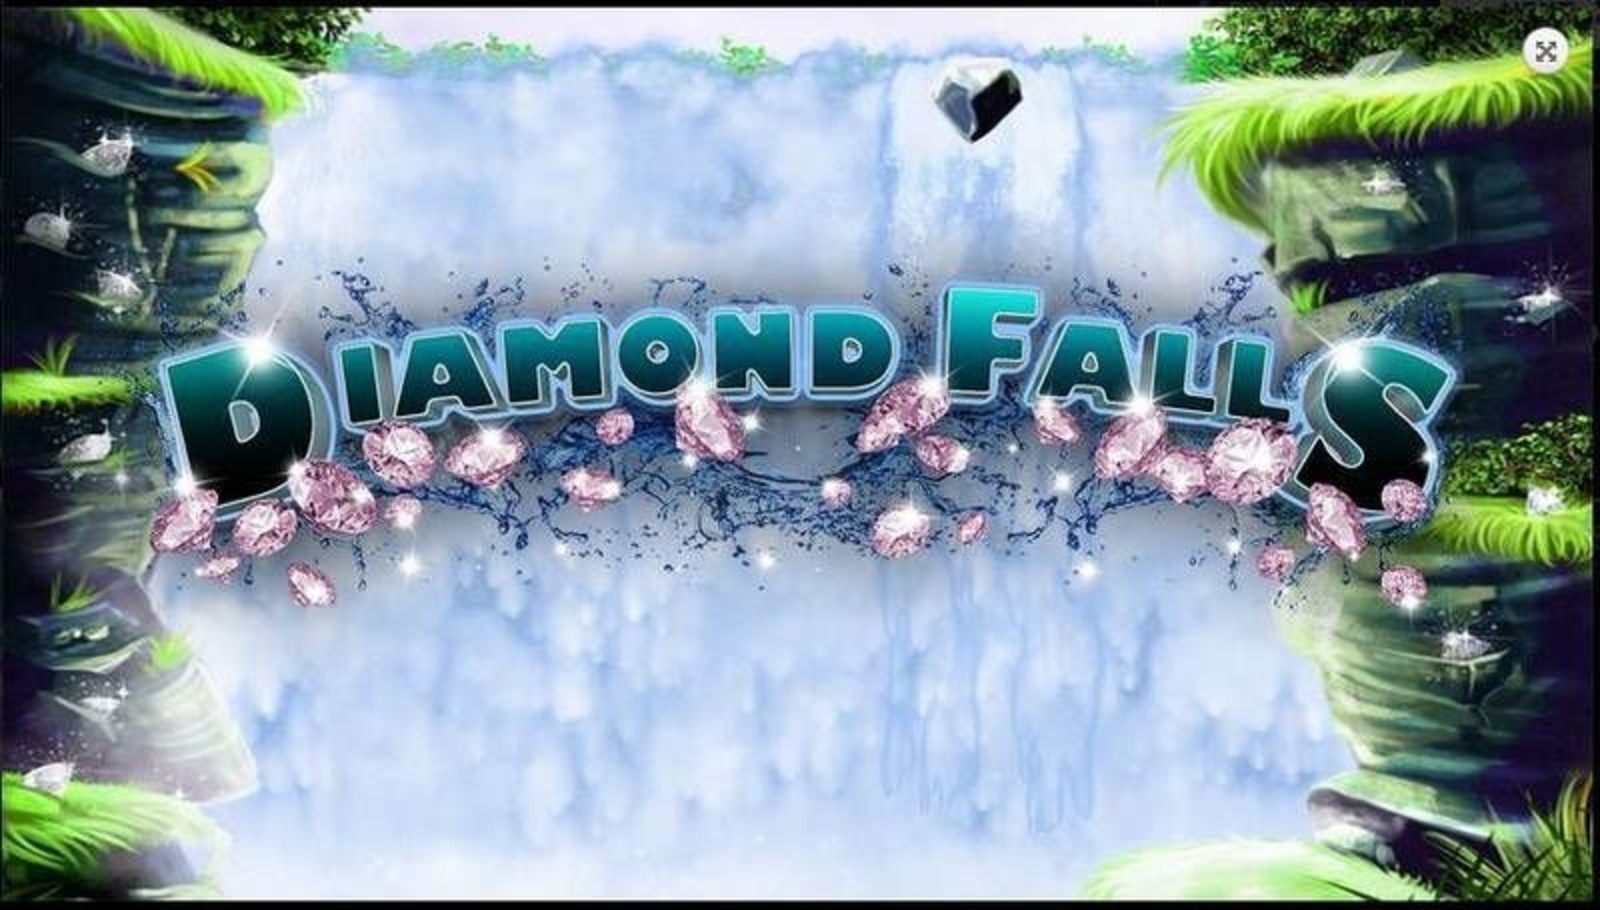 The Diamond falls Online Slot Demo Game by 2 By 2 Gaming